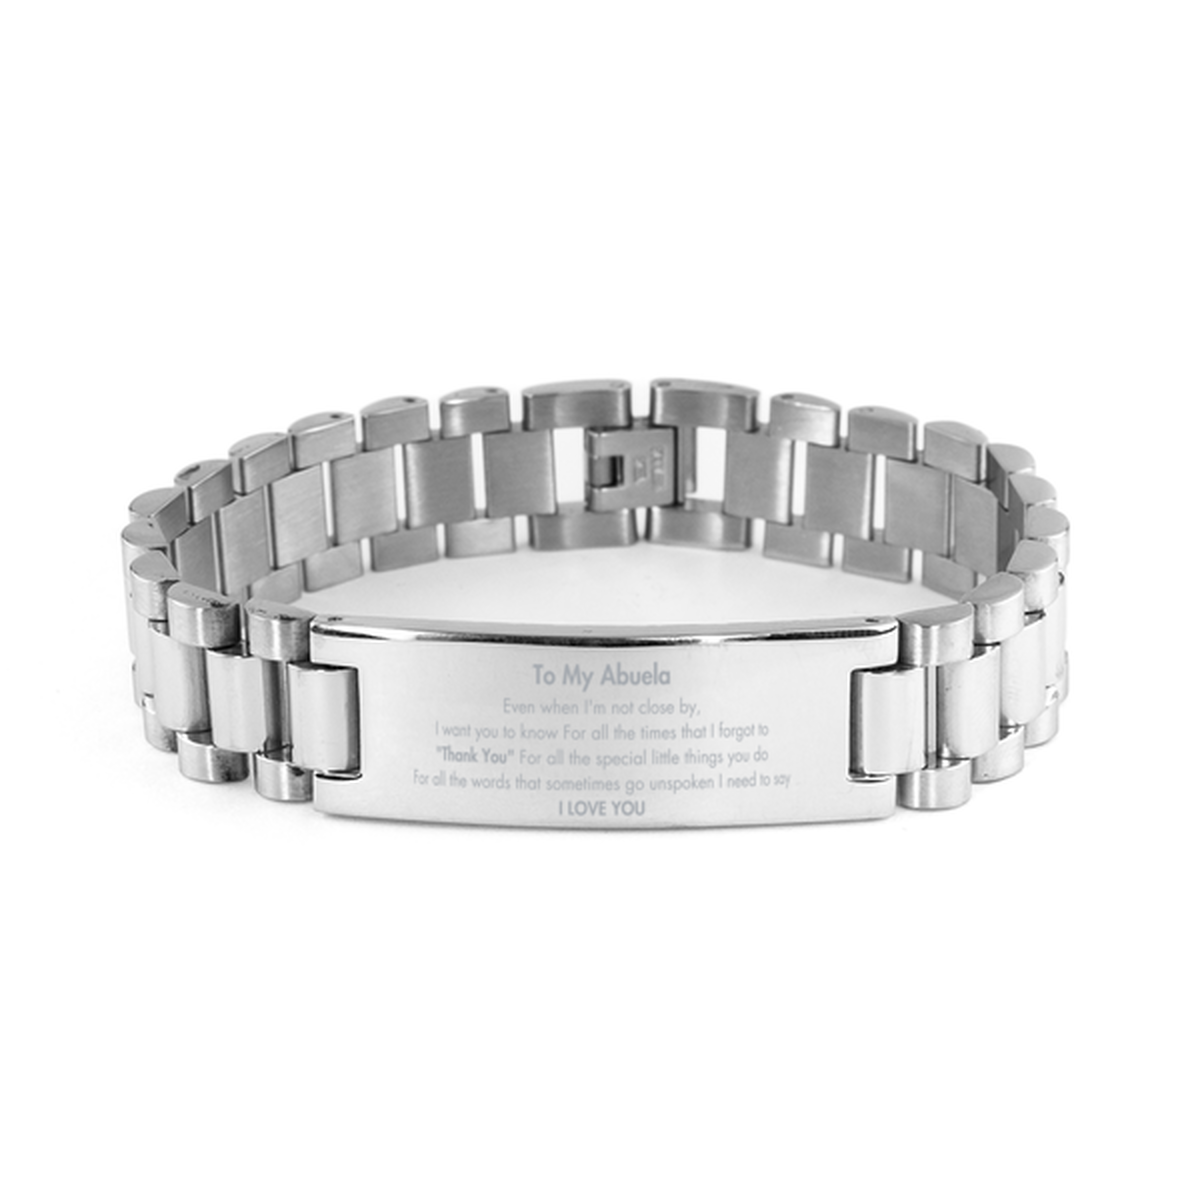 Thank You Gifts for Abuela, Keepsake Ladder Stainless Steel Bracelet Gifts for Abuela Birthday Mother's day Father's Day Abuela For all the words That sometimes go unspoken I need to say I LOVE YOU